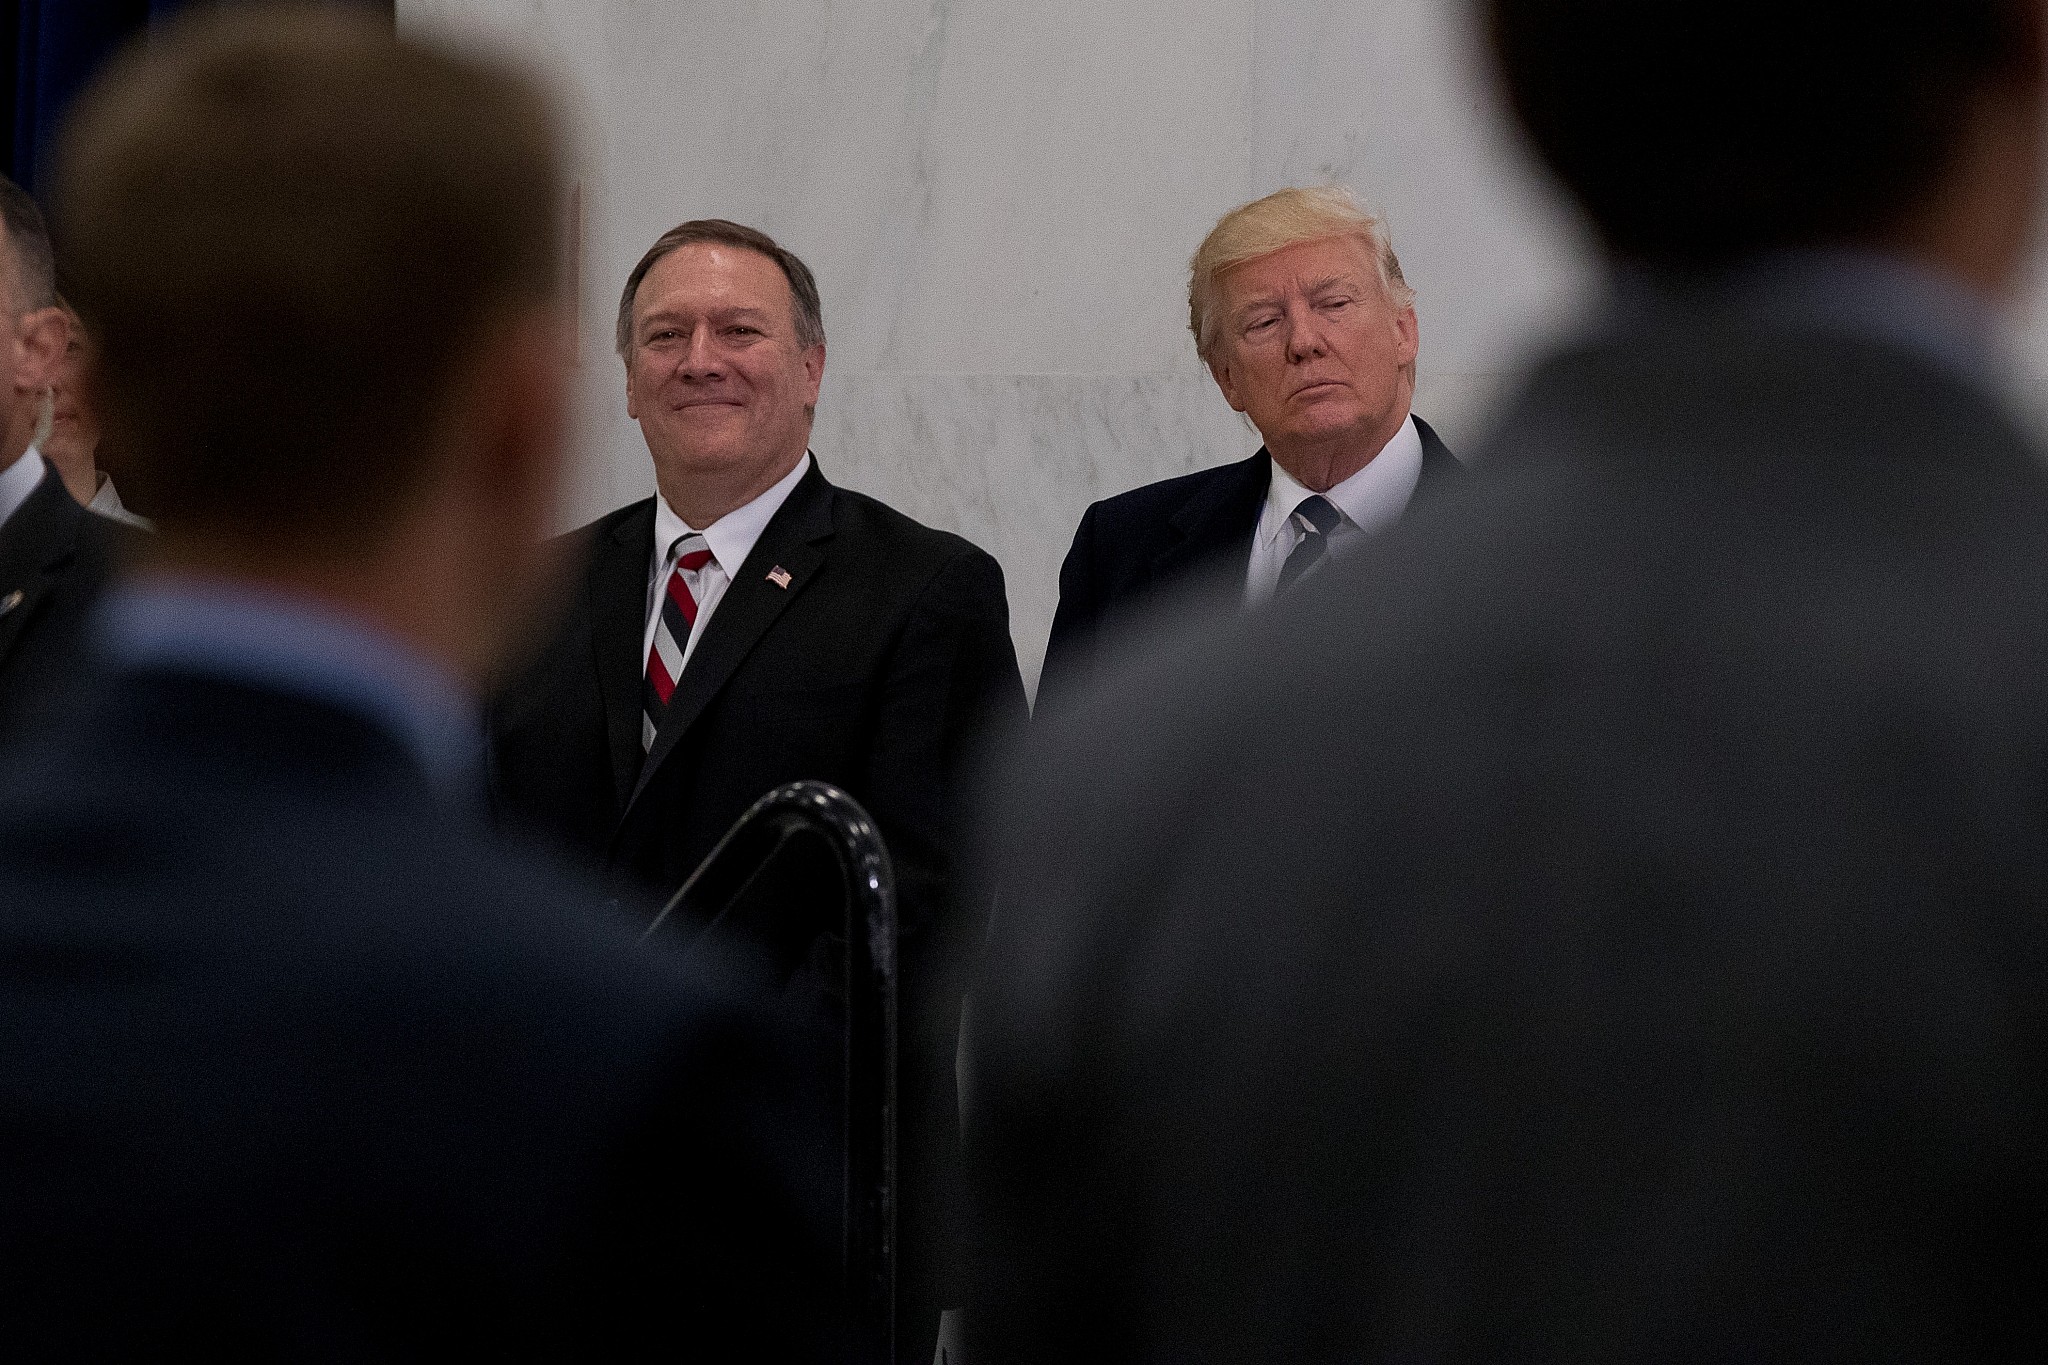 Pompeo Confirmed As Trump’s New Secretary of State